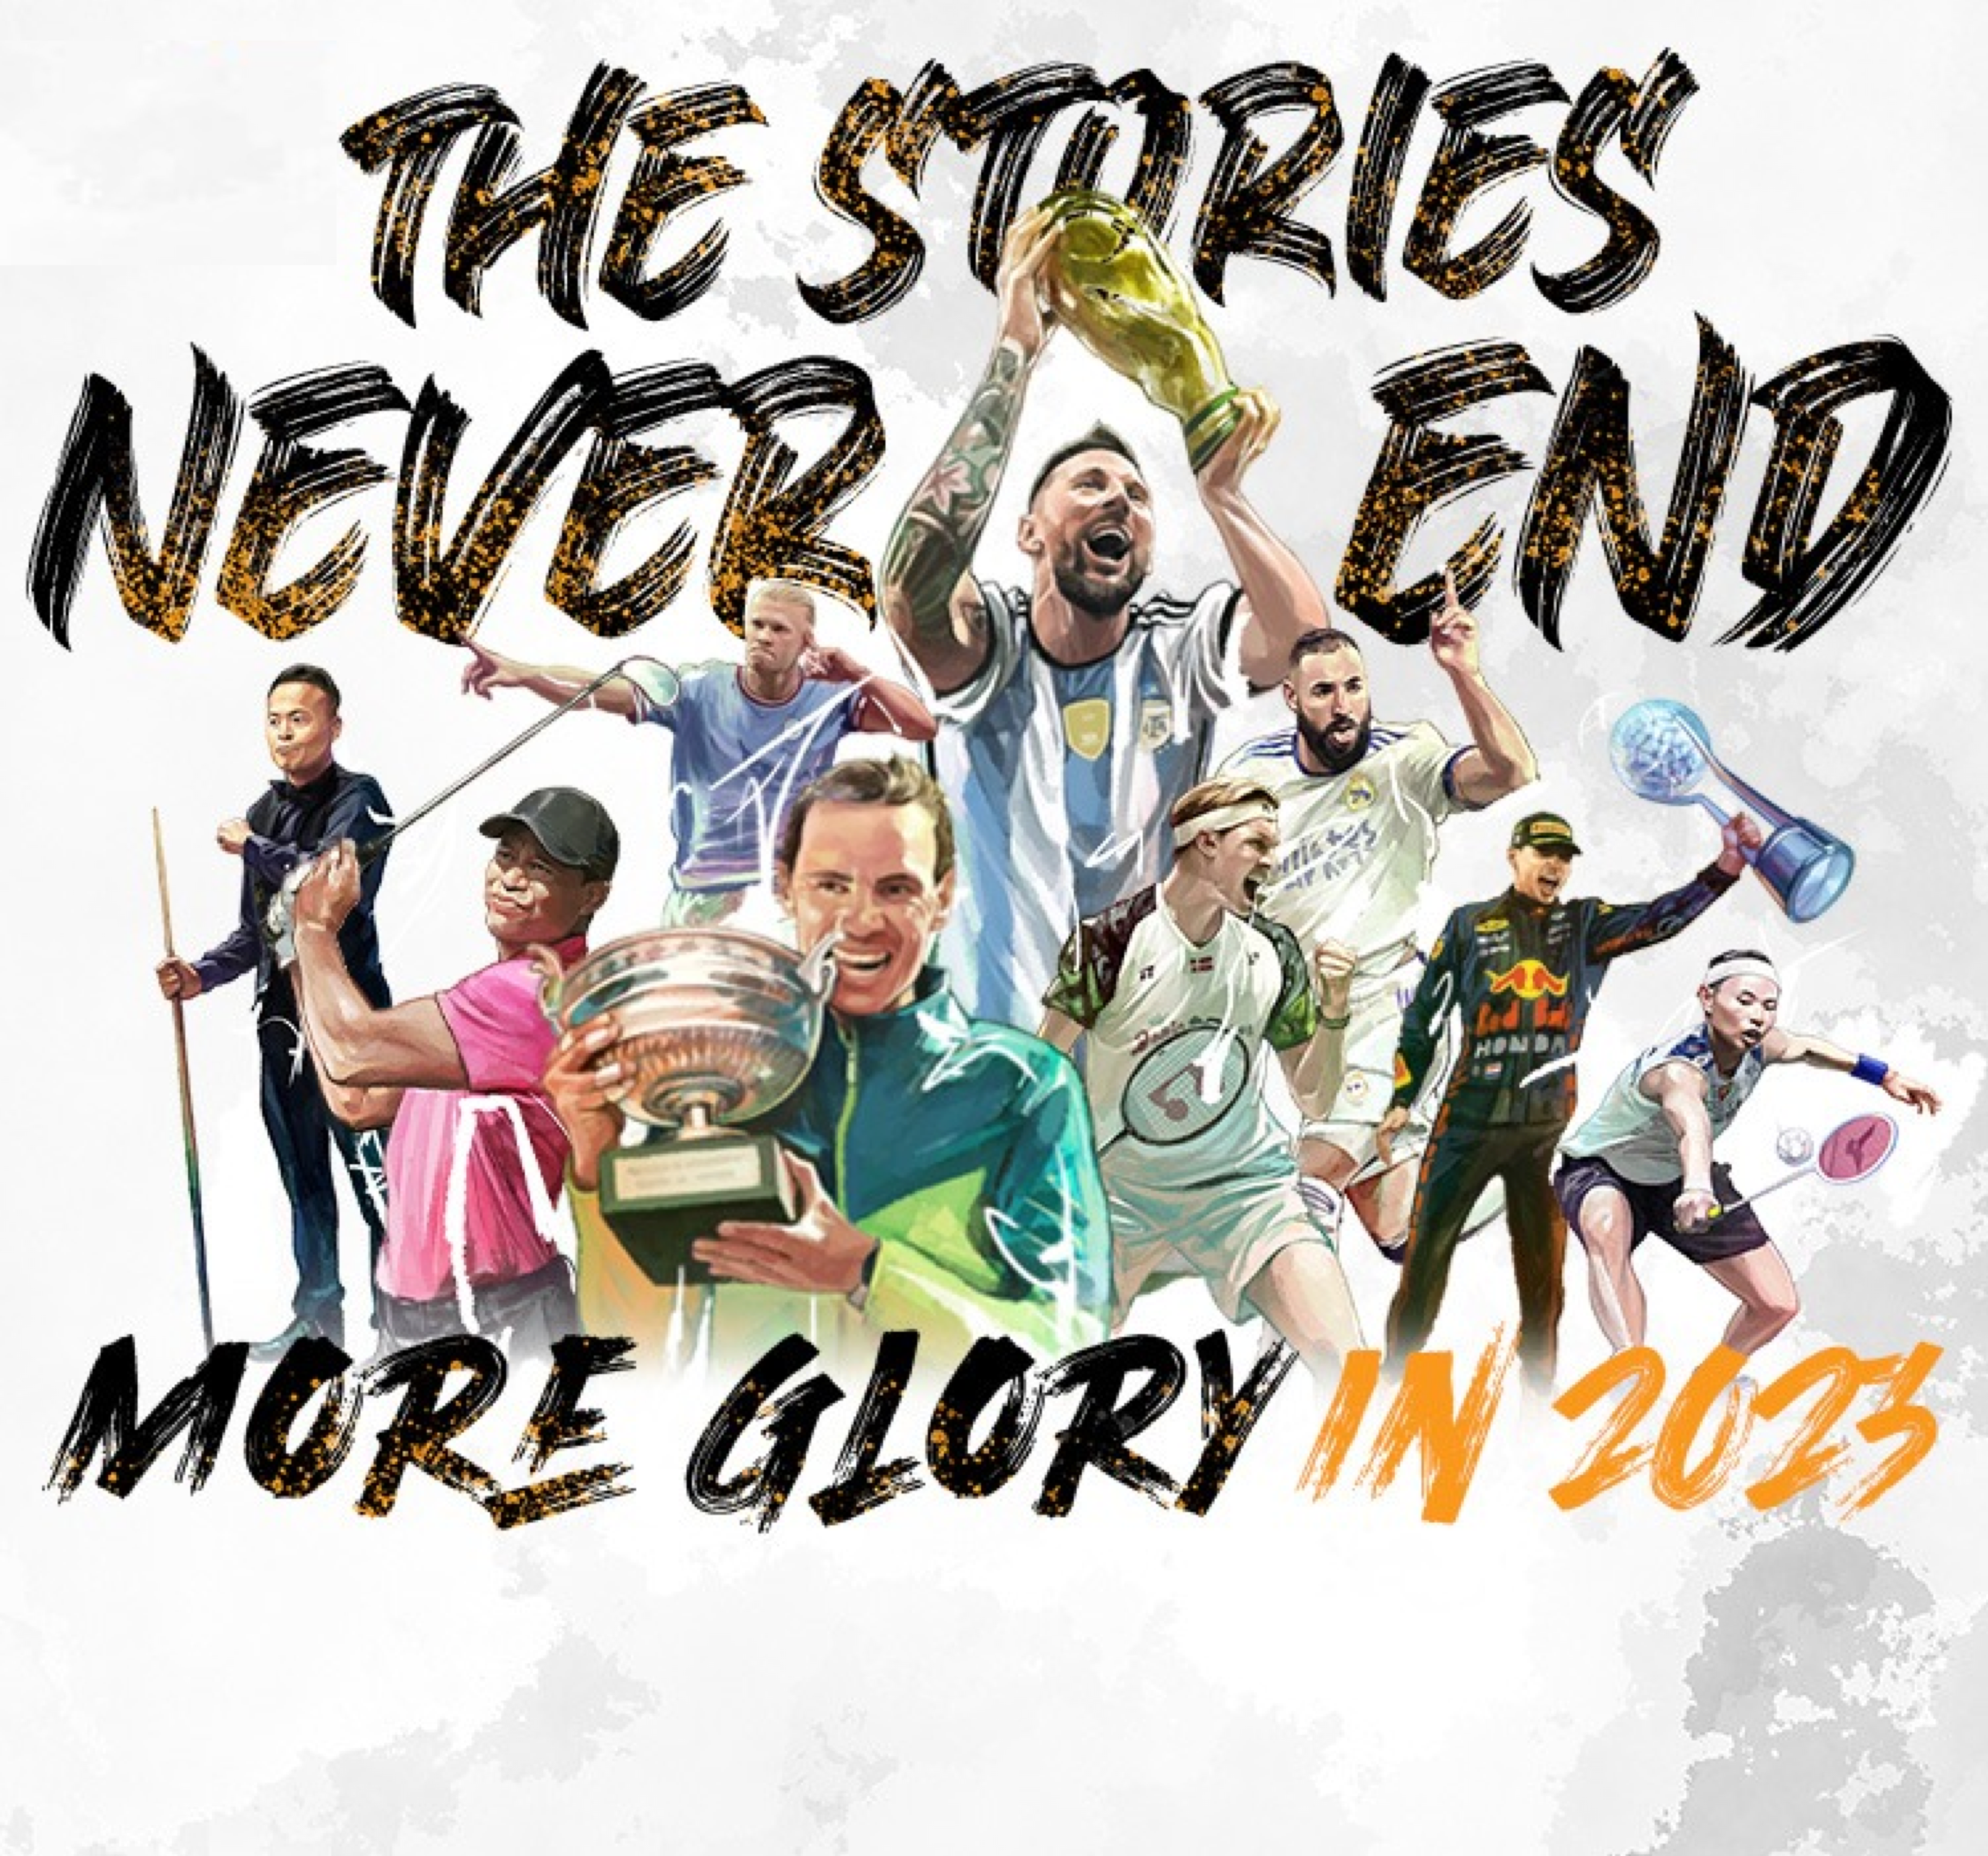 The Story Never Ends: More Glory in 2023!​ The world of sports was full of excitement and passion! The breathtaking moments are just like comic strips or animated shows! In 2023, Now TV will bring even more unforgettable sporting